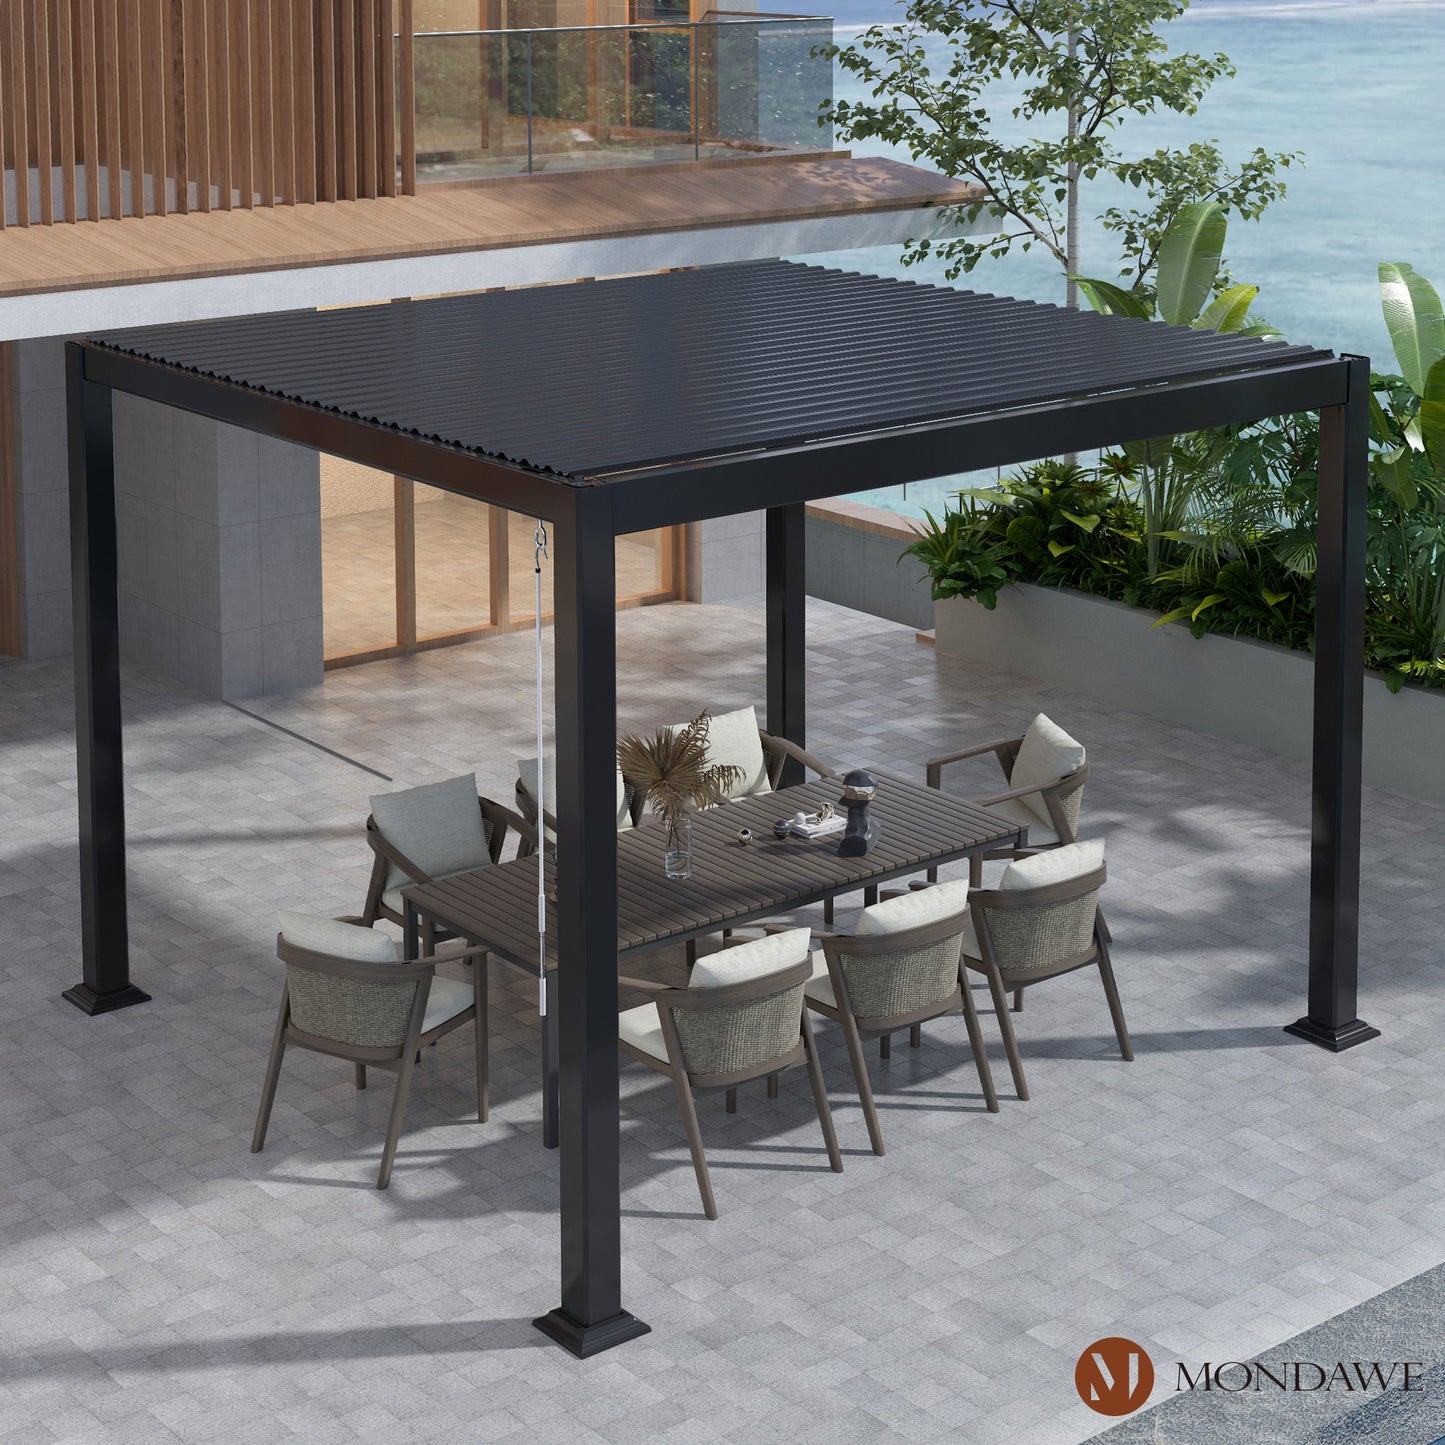 10 x 10 ft Outdoor Louvered Pergola in Aluminum with Adjustable Roof